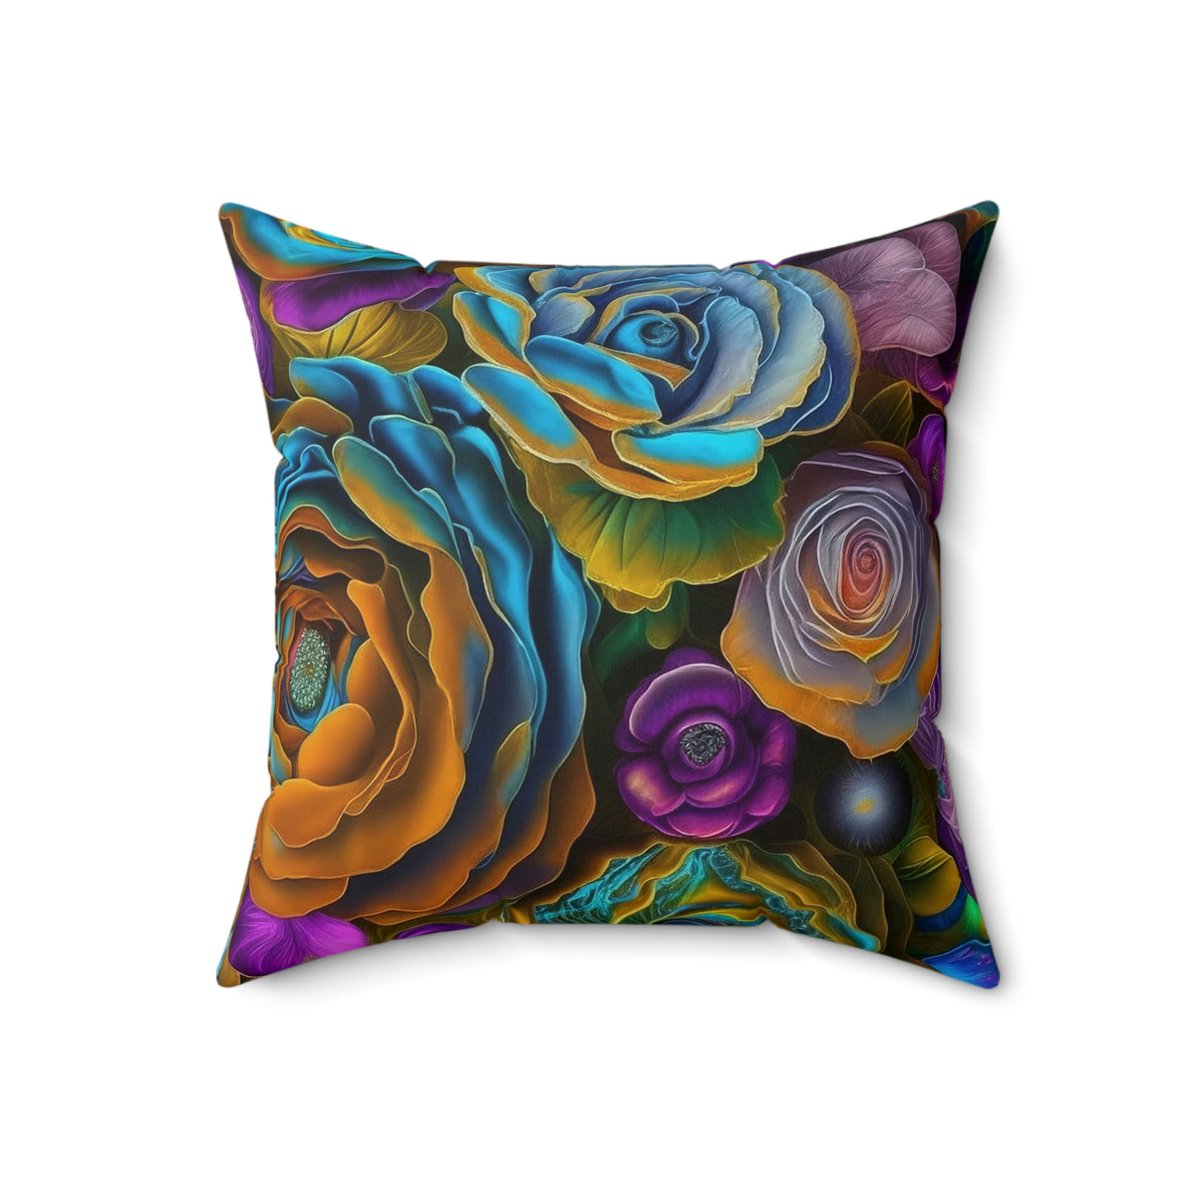 Excited to share the latest addition to my #etsy shop: Pillow - Accent - Throw - Couch - Floral Fantasy - Square - Unique - Beautiful - Artistic etsy.me/44VtEfx #pillow #pillows #throwpillow #throwpillows #accentpillow #accentpillows #decorativepillow #bedpillo